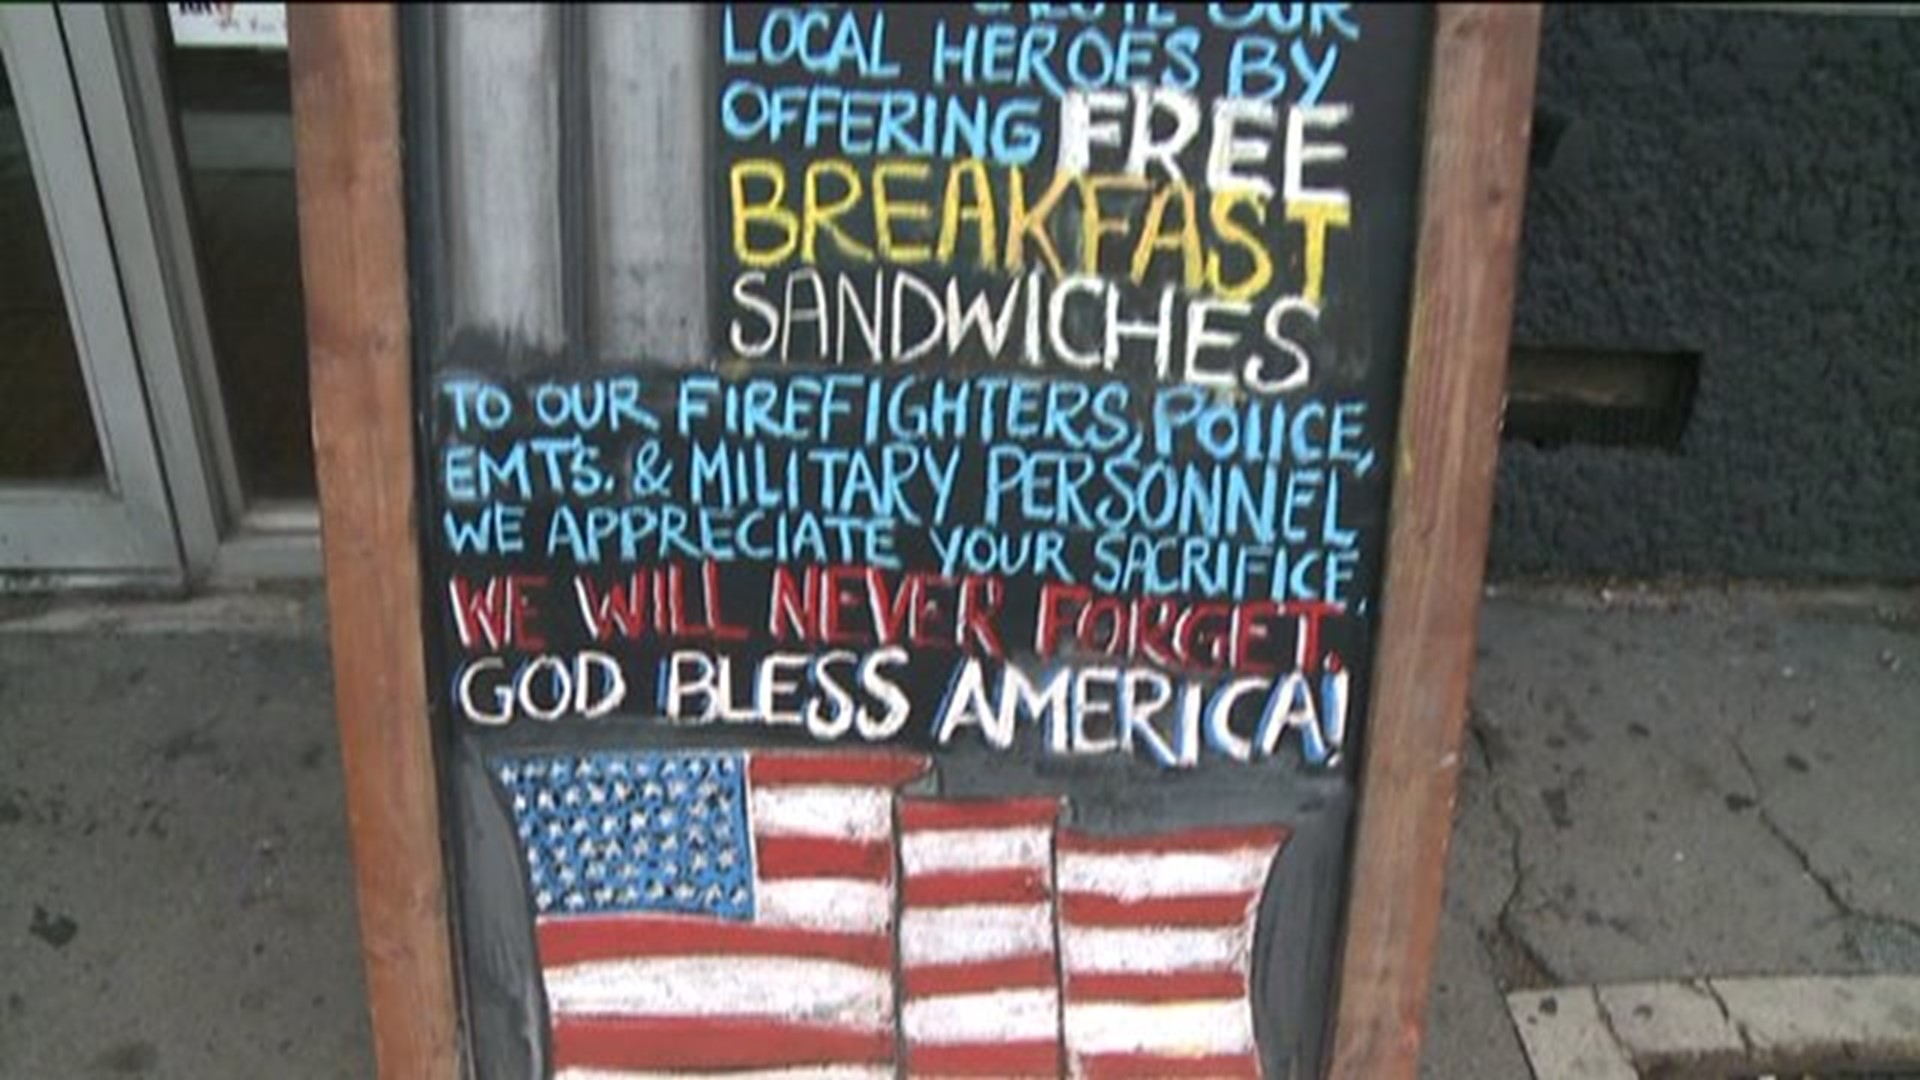 Free Breakfast for First Responders